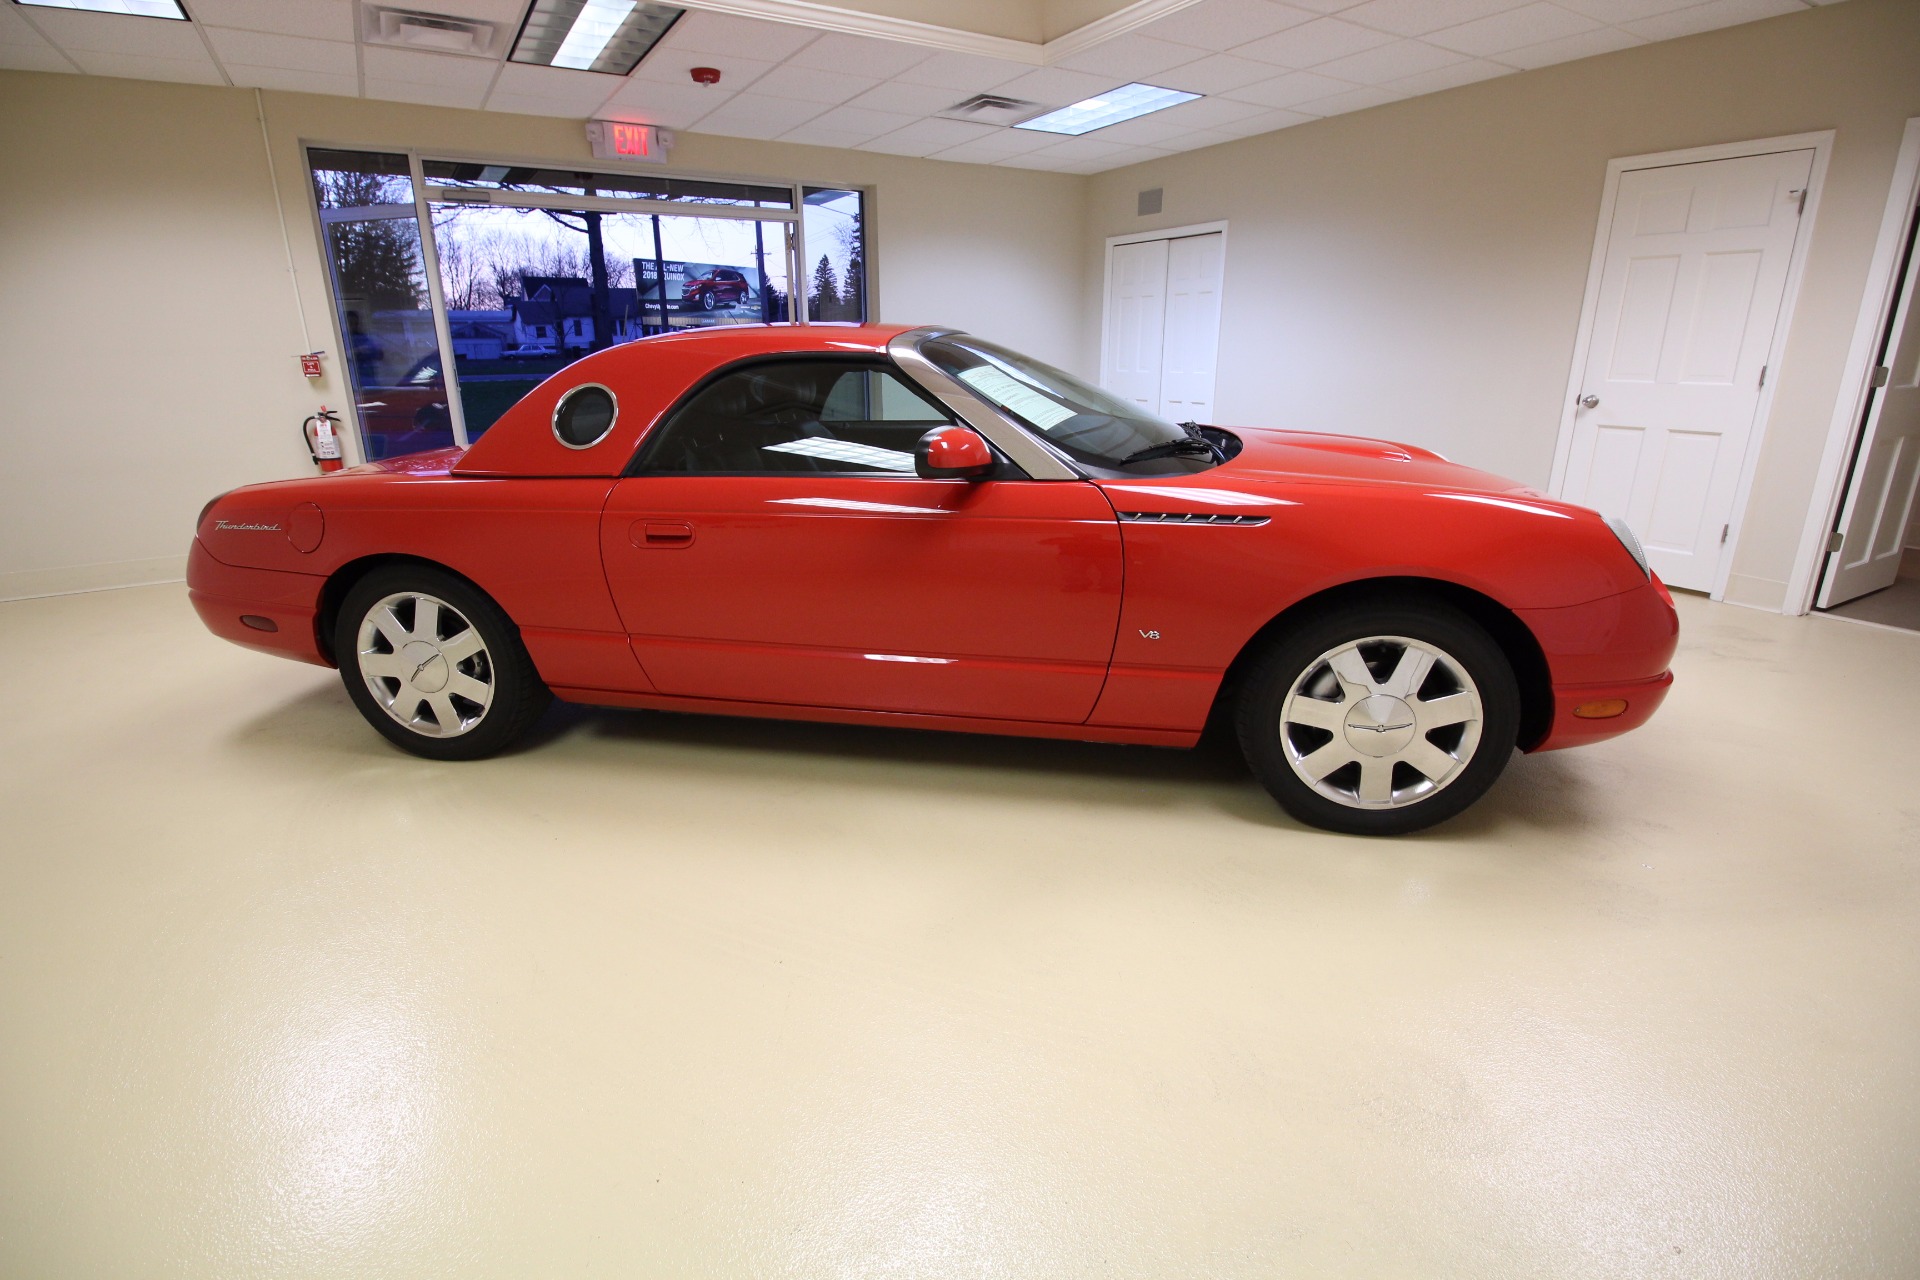 Used 2003 Ford Thunderbird Premium with removable top | Albany, NY